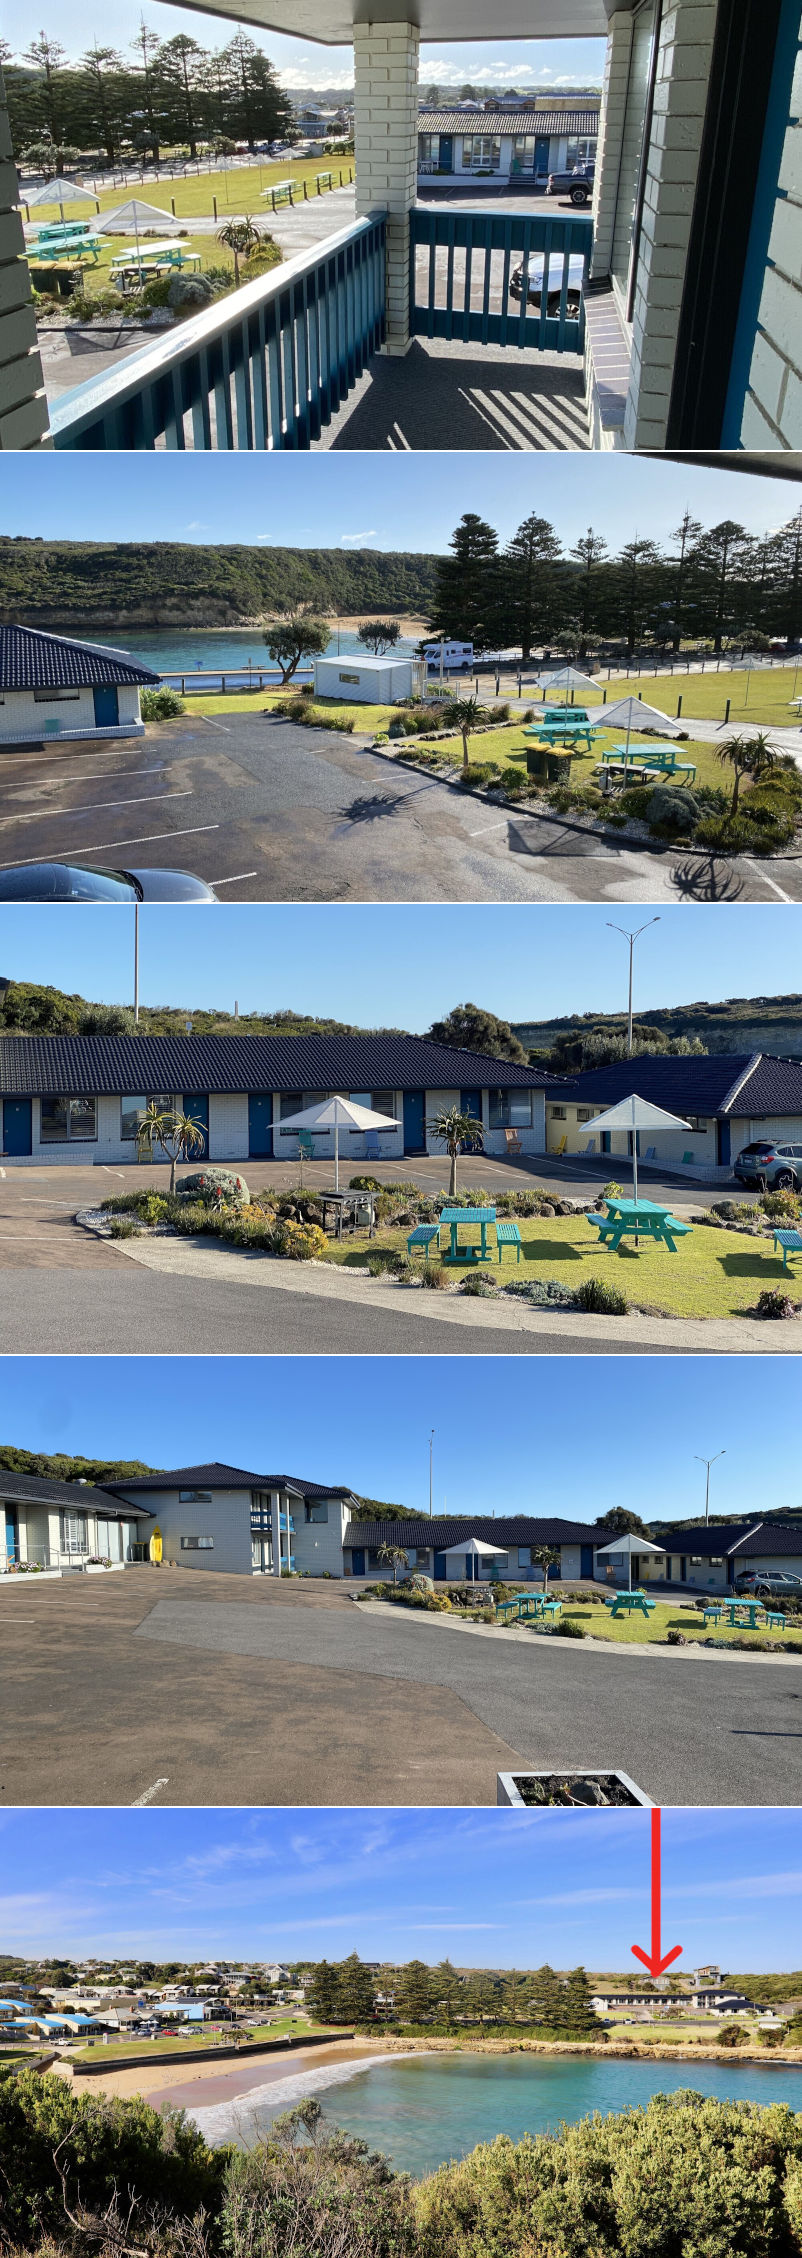 Southern Ocean Motor Inn - Grounds and facilities